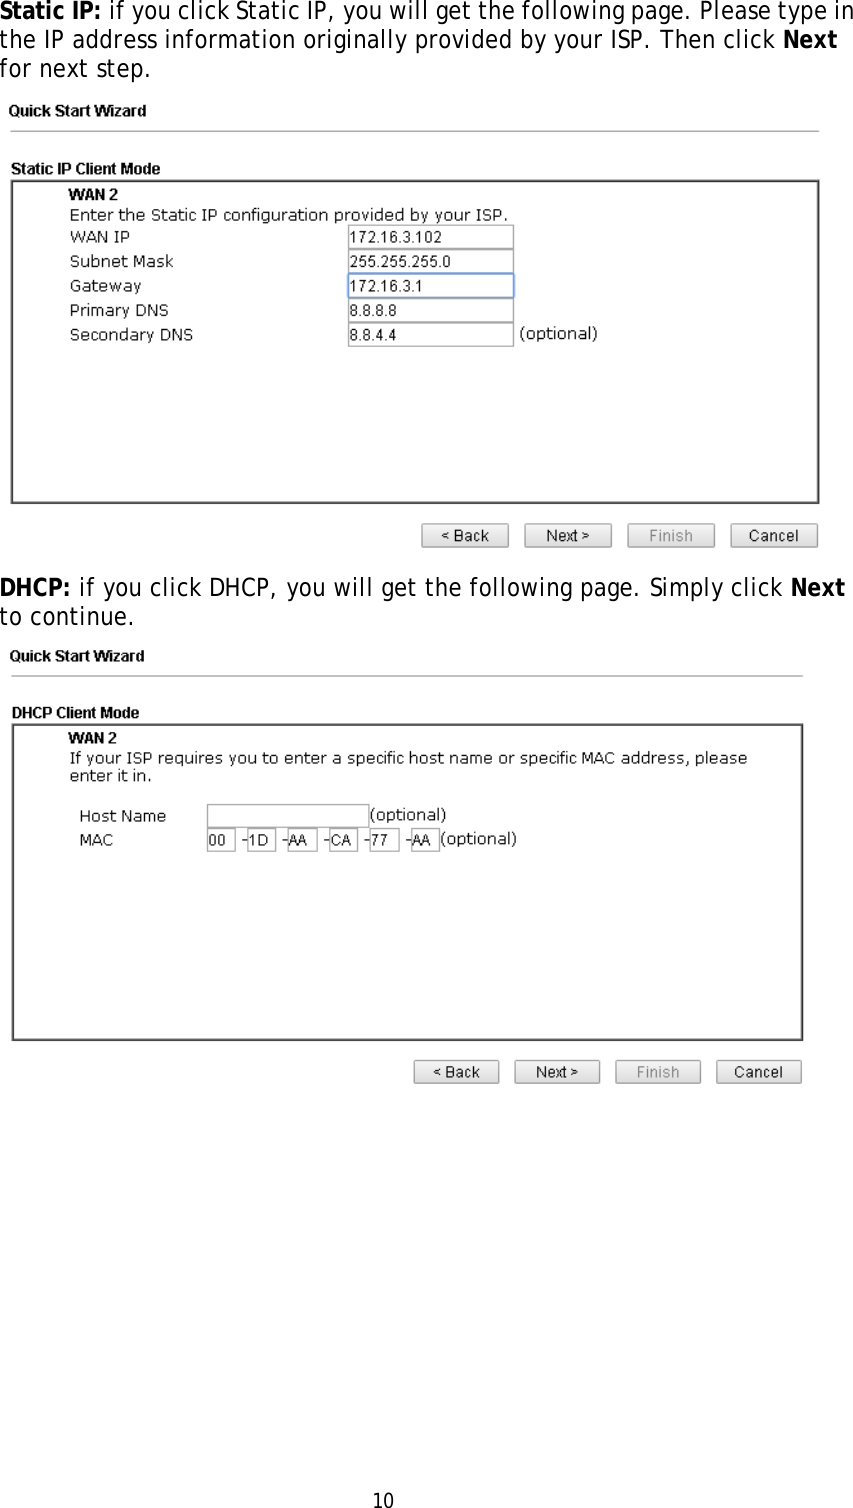   10Static IP: if you click Static IP, you will get the following page. Please type in the IP address information originally provided by your ISP. Then click Next for next step.  DHCP: if you click DHCP, you will get the following page. Simply click Next to continue.  